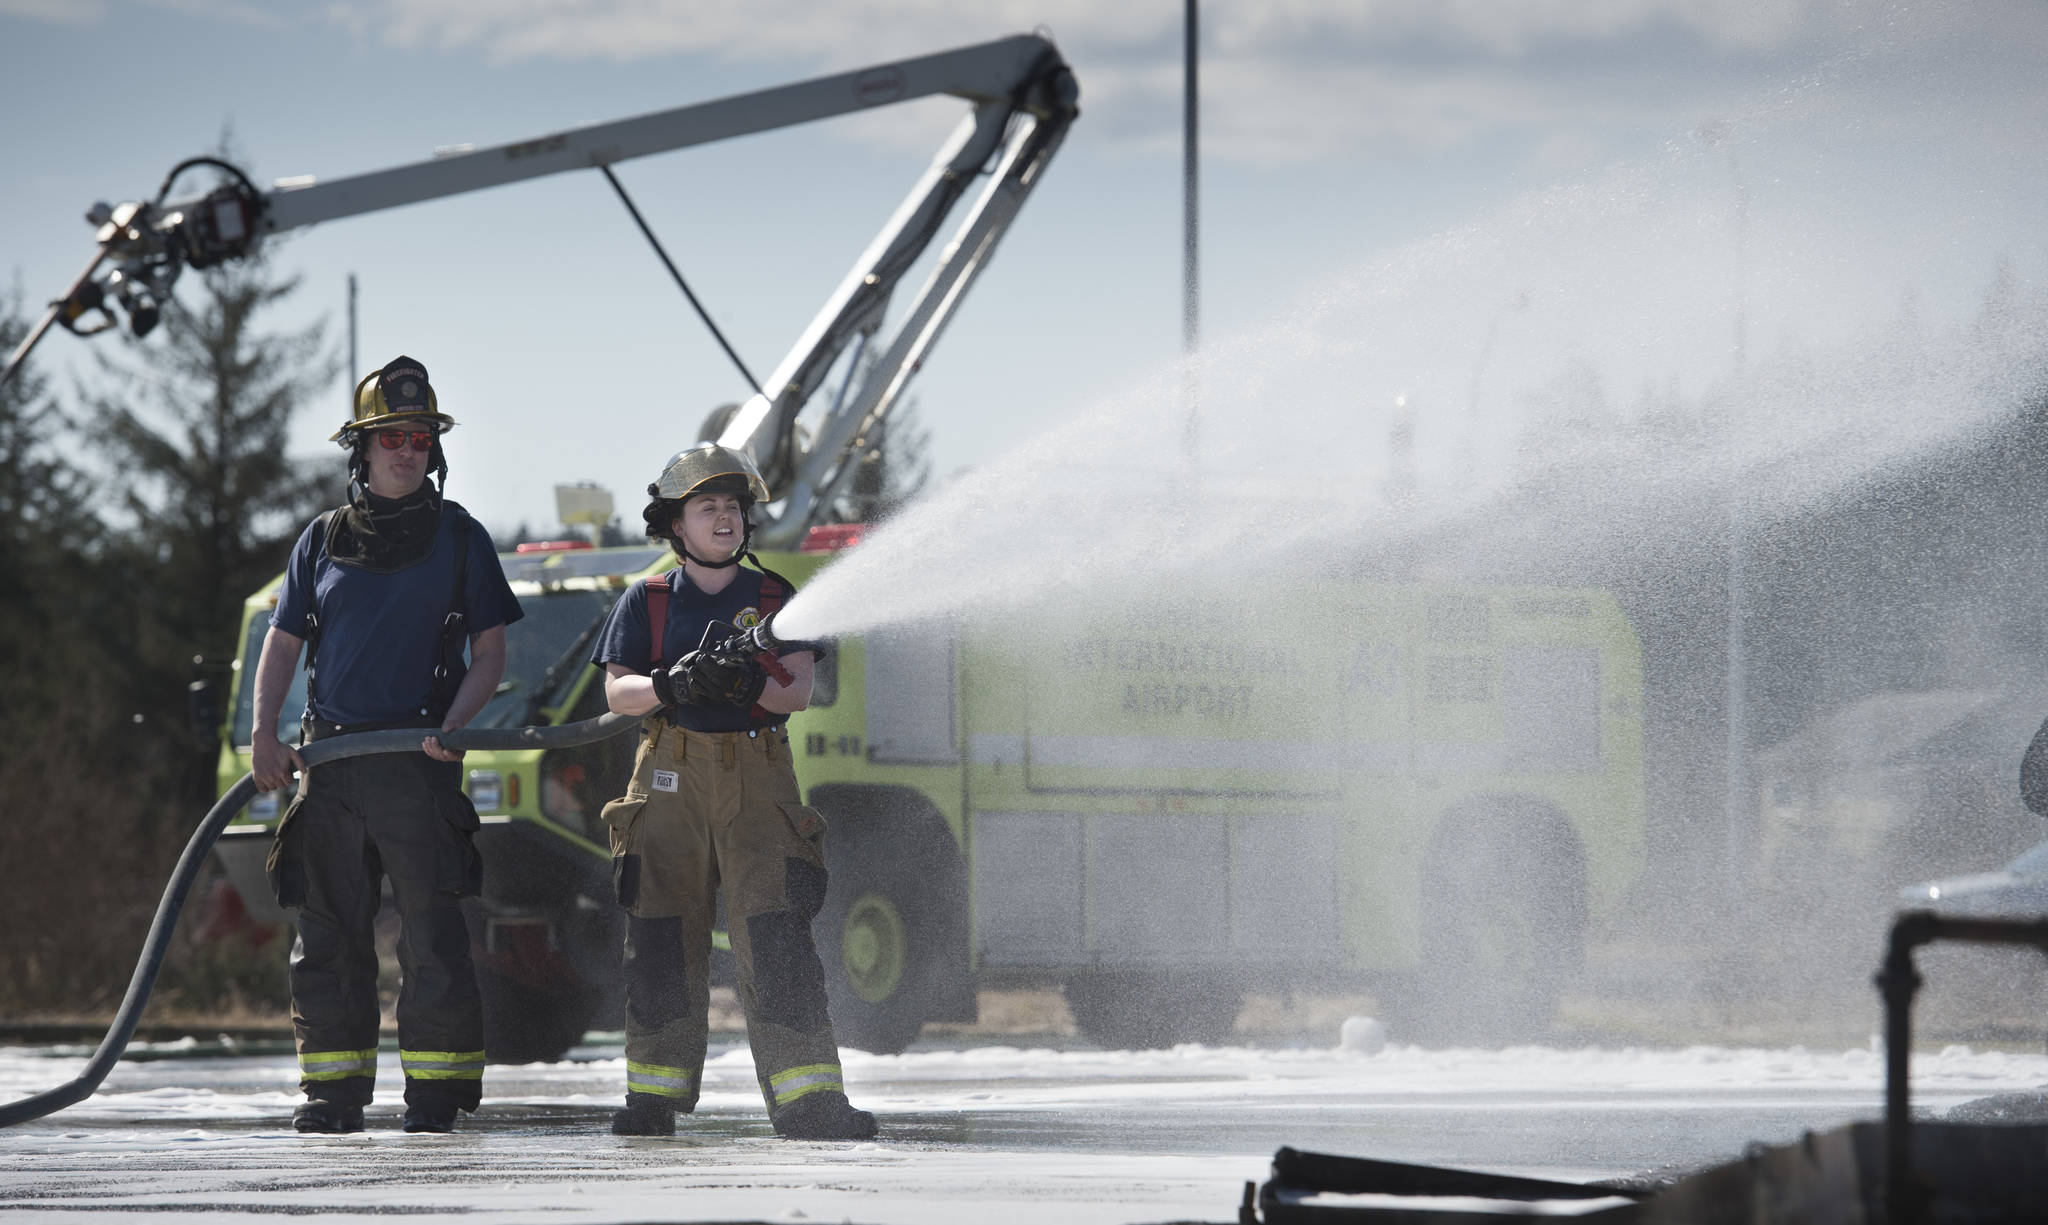 Firefighters Krista Telnes, right, and Dave Edmunds of Capital City Fire/Rescue washdown foam leftover from their airport rescue firefighting skills training at the Hagevig Regional Fire Training Center on Thursday, April 13, 2017. October is Fire Prevention Month in Alaska, and CCFR will offer tours of their facilities. (Michael Penn | Juneau Empire)